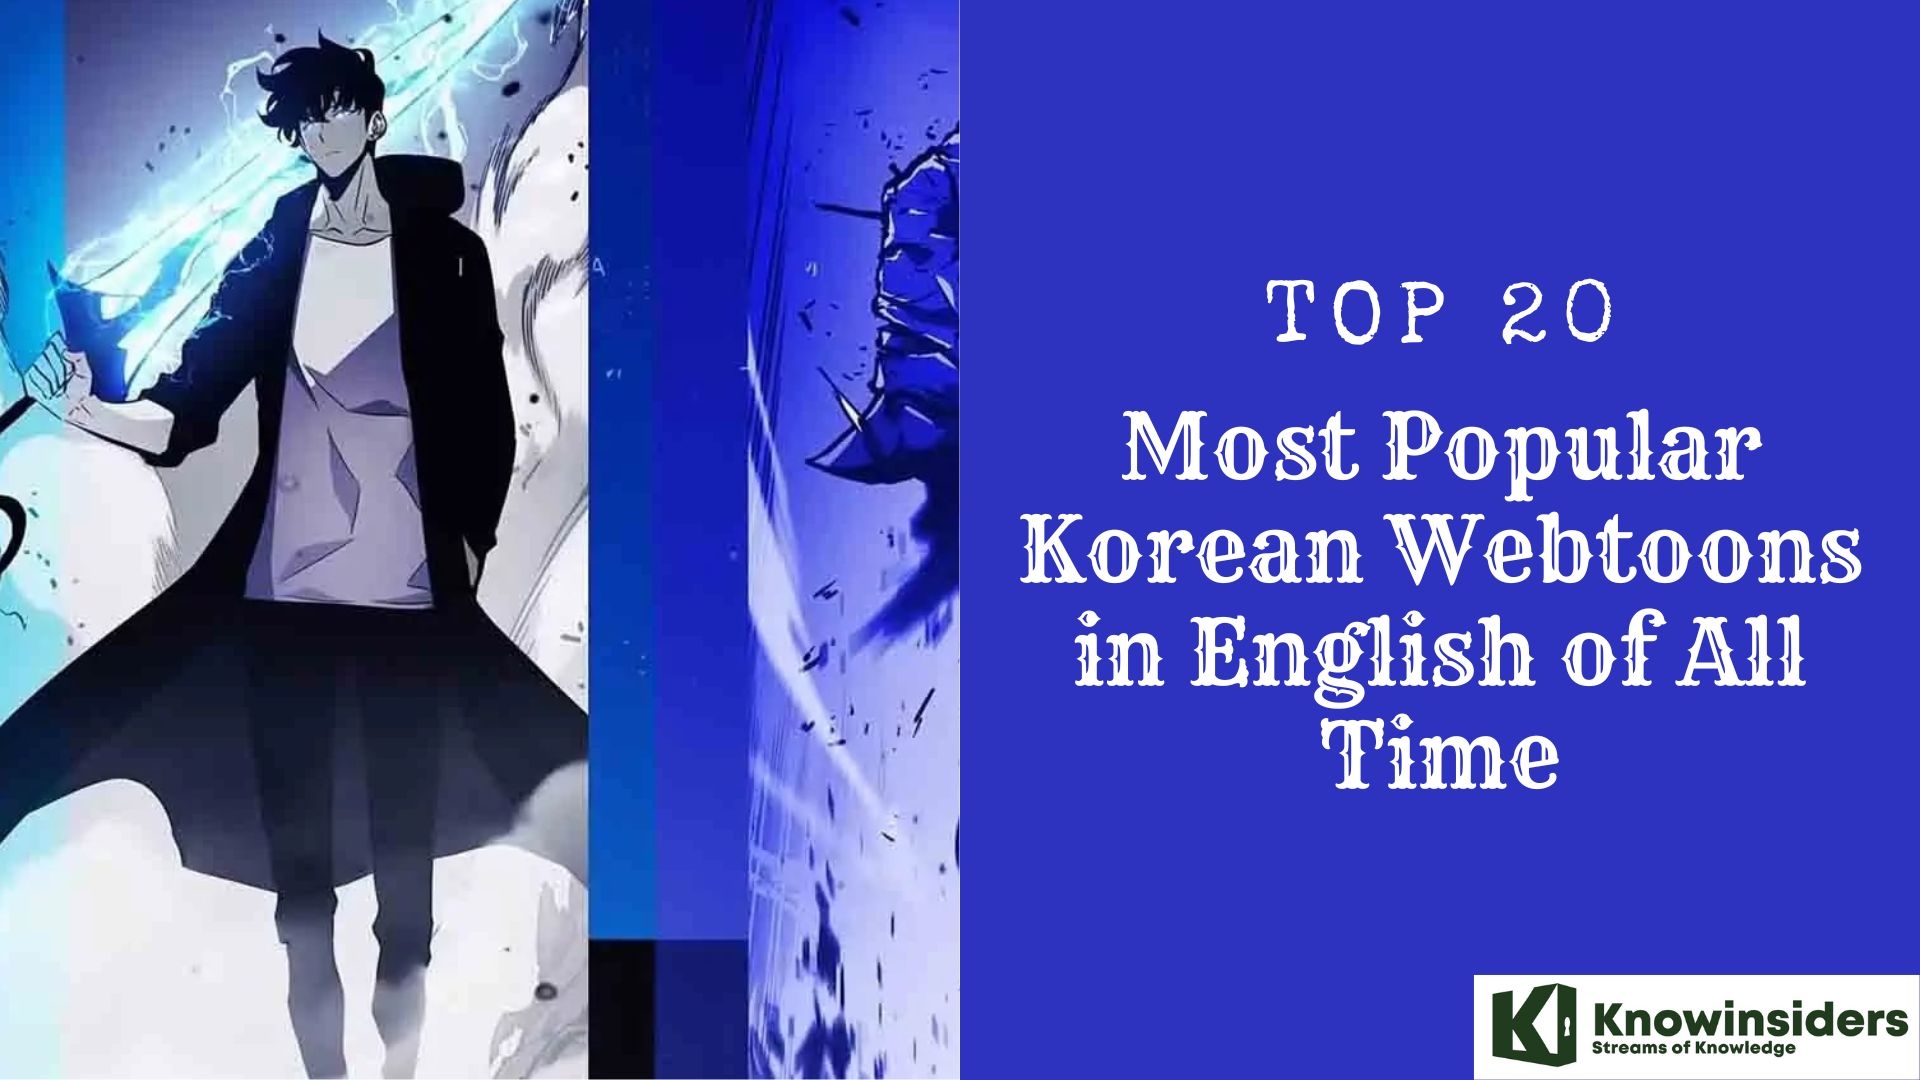 Top 20 Most Well-Known Korean Webtoons in English of All Time